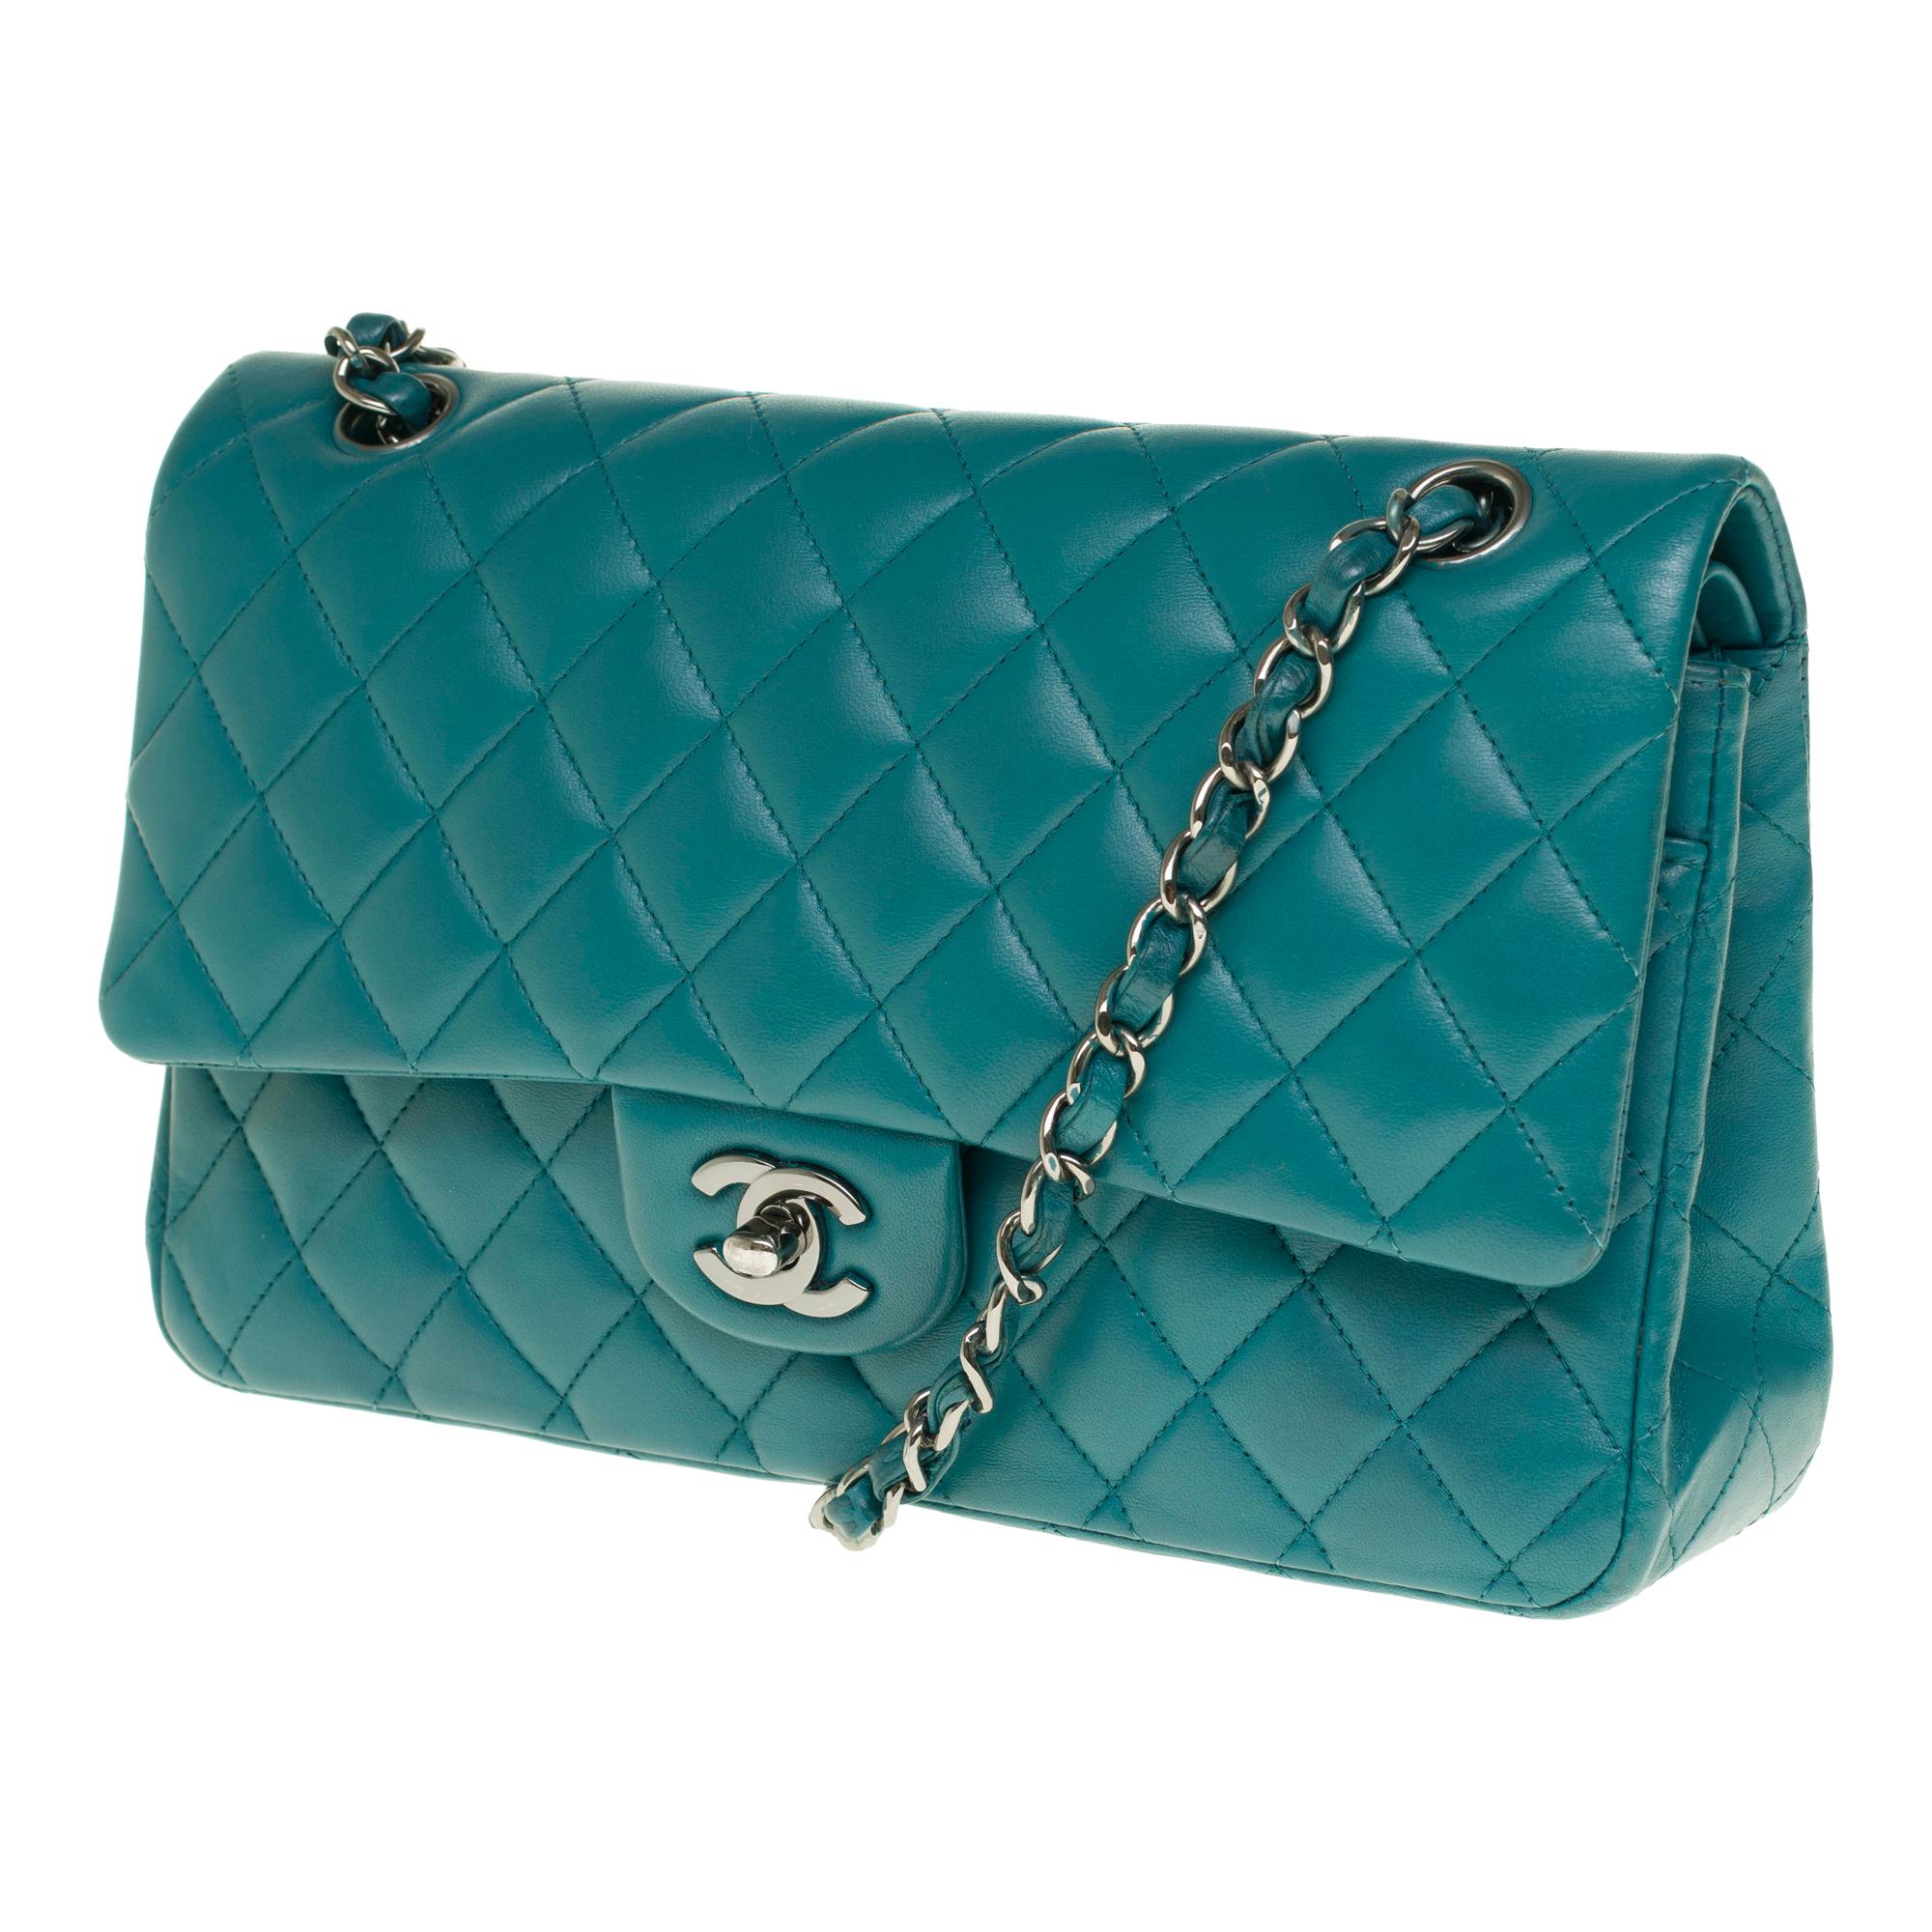 Blue Amazing Chanel 2.55 handbag in green quilted lamb leather, Silver hardware